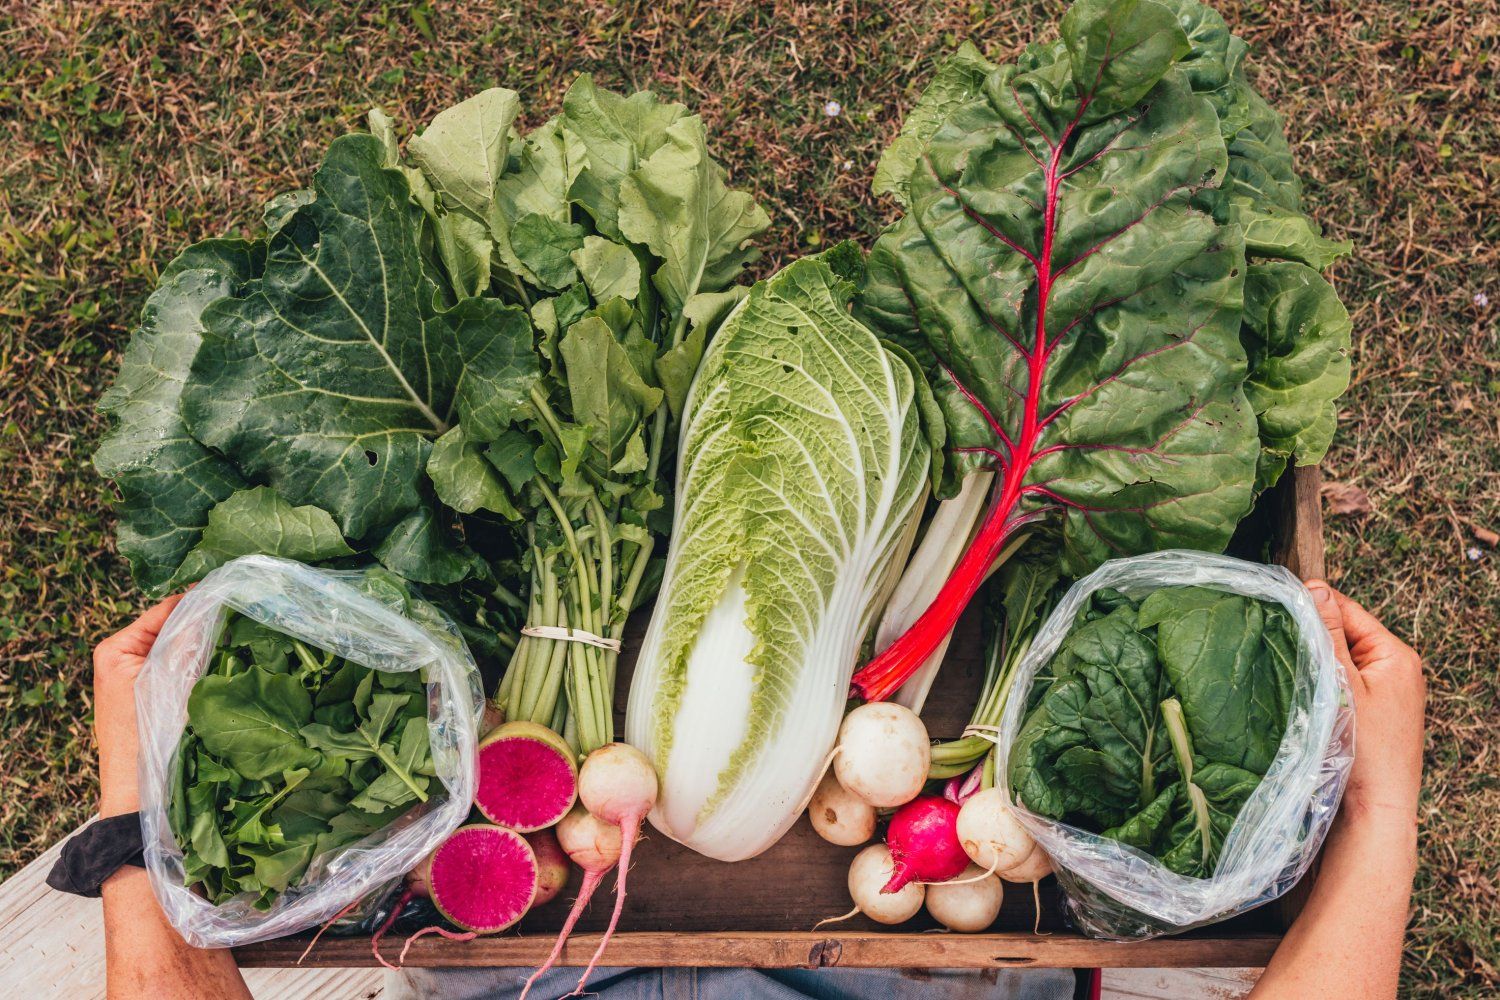 Previous Happening: Eat More Veggies in 2024! The Village Farm Vegetable Share Makes it Easy